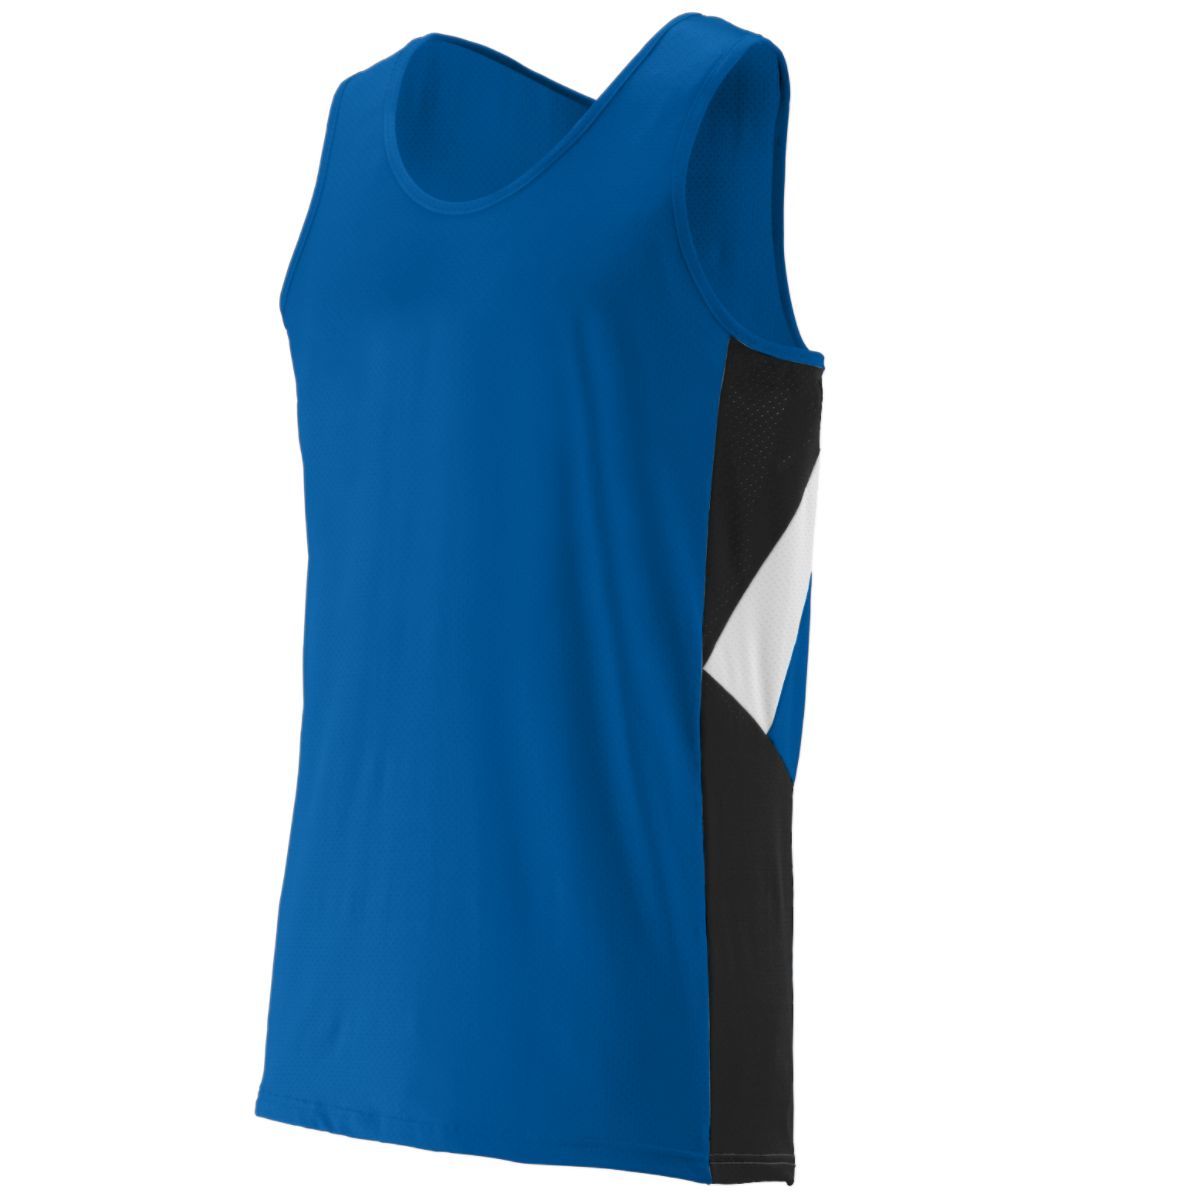 Augusta Sportswear Sprint Jersey in Royal/Black/White  -Part of the Adult, Adult-Jersey, Augusta-Products, Track-Field, Shirts product lines at KanaleyCreations.com